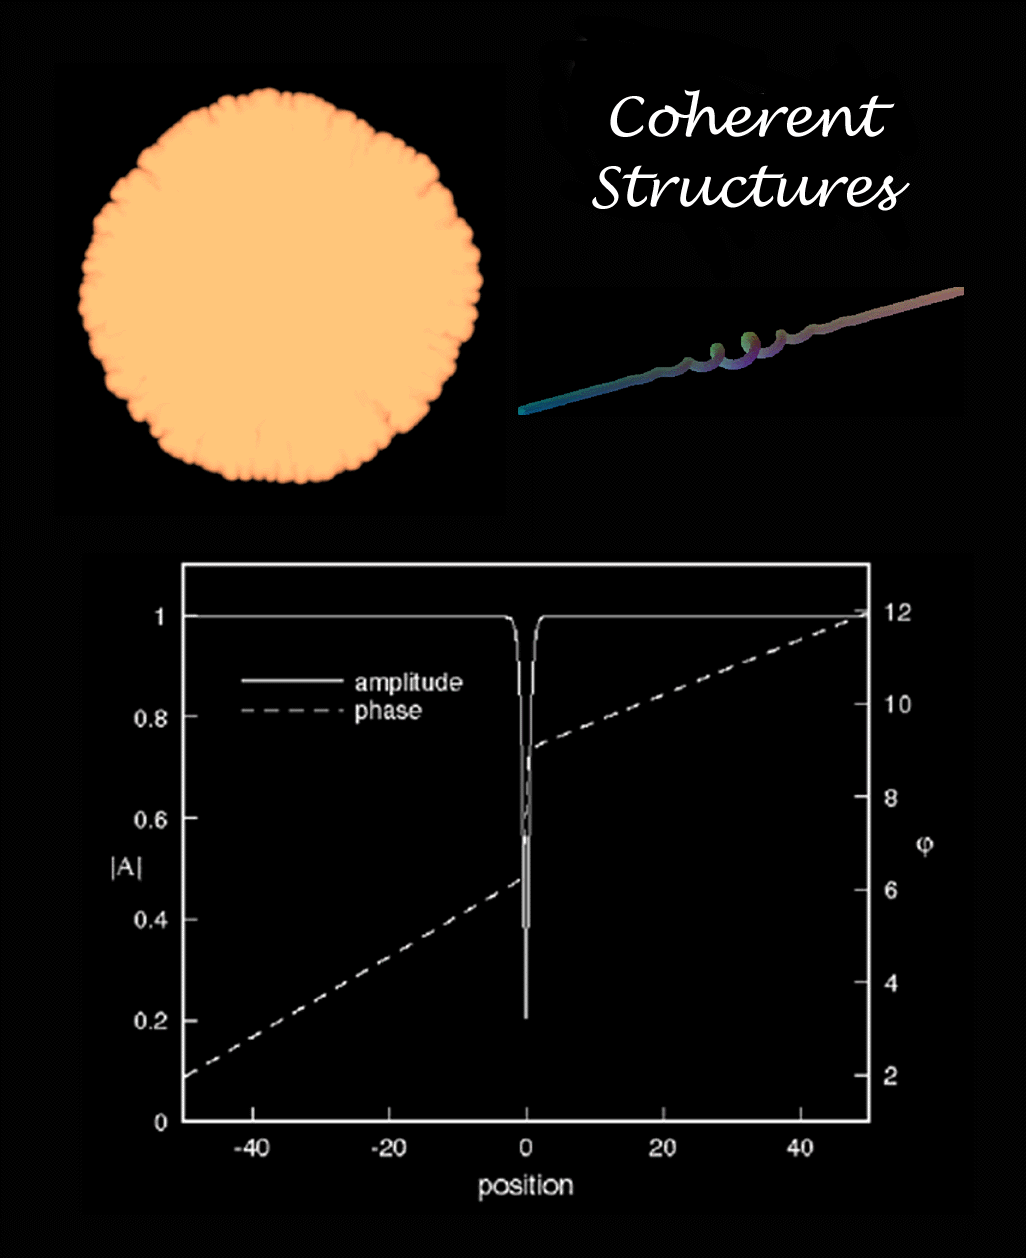 Coherent Structures